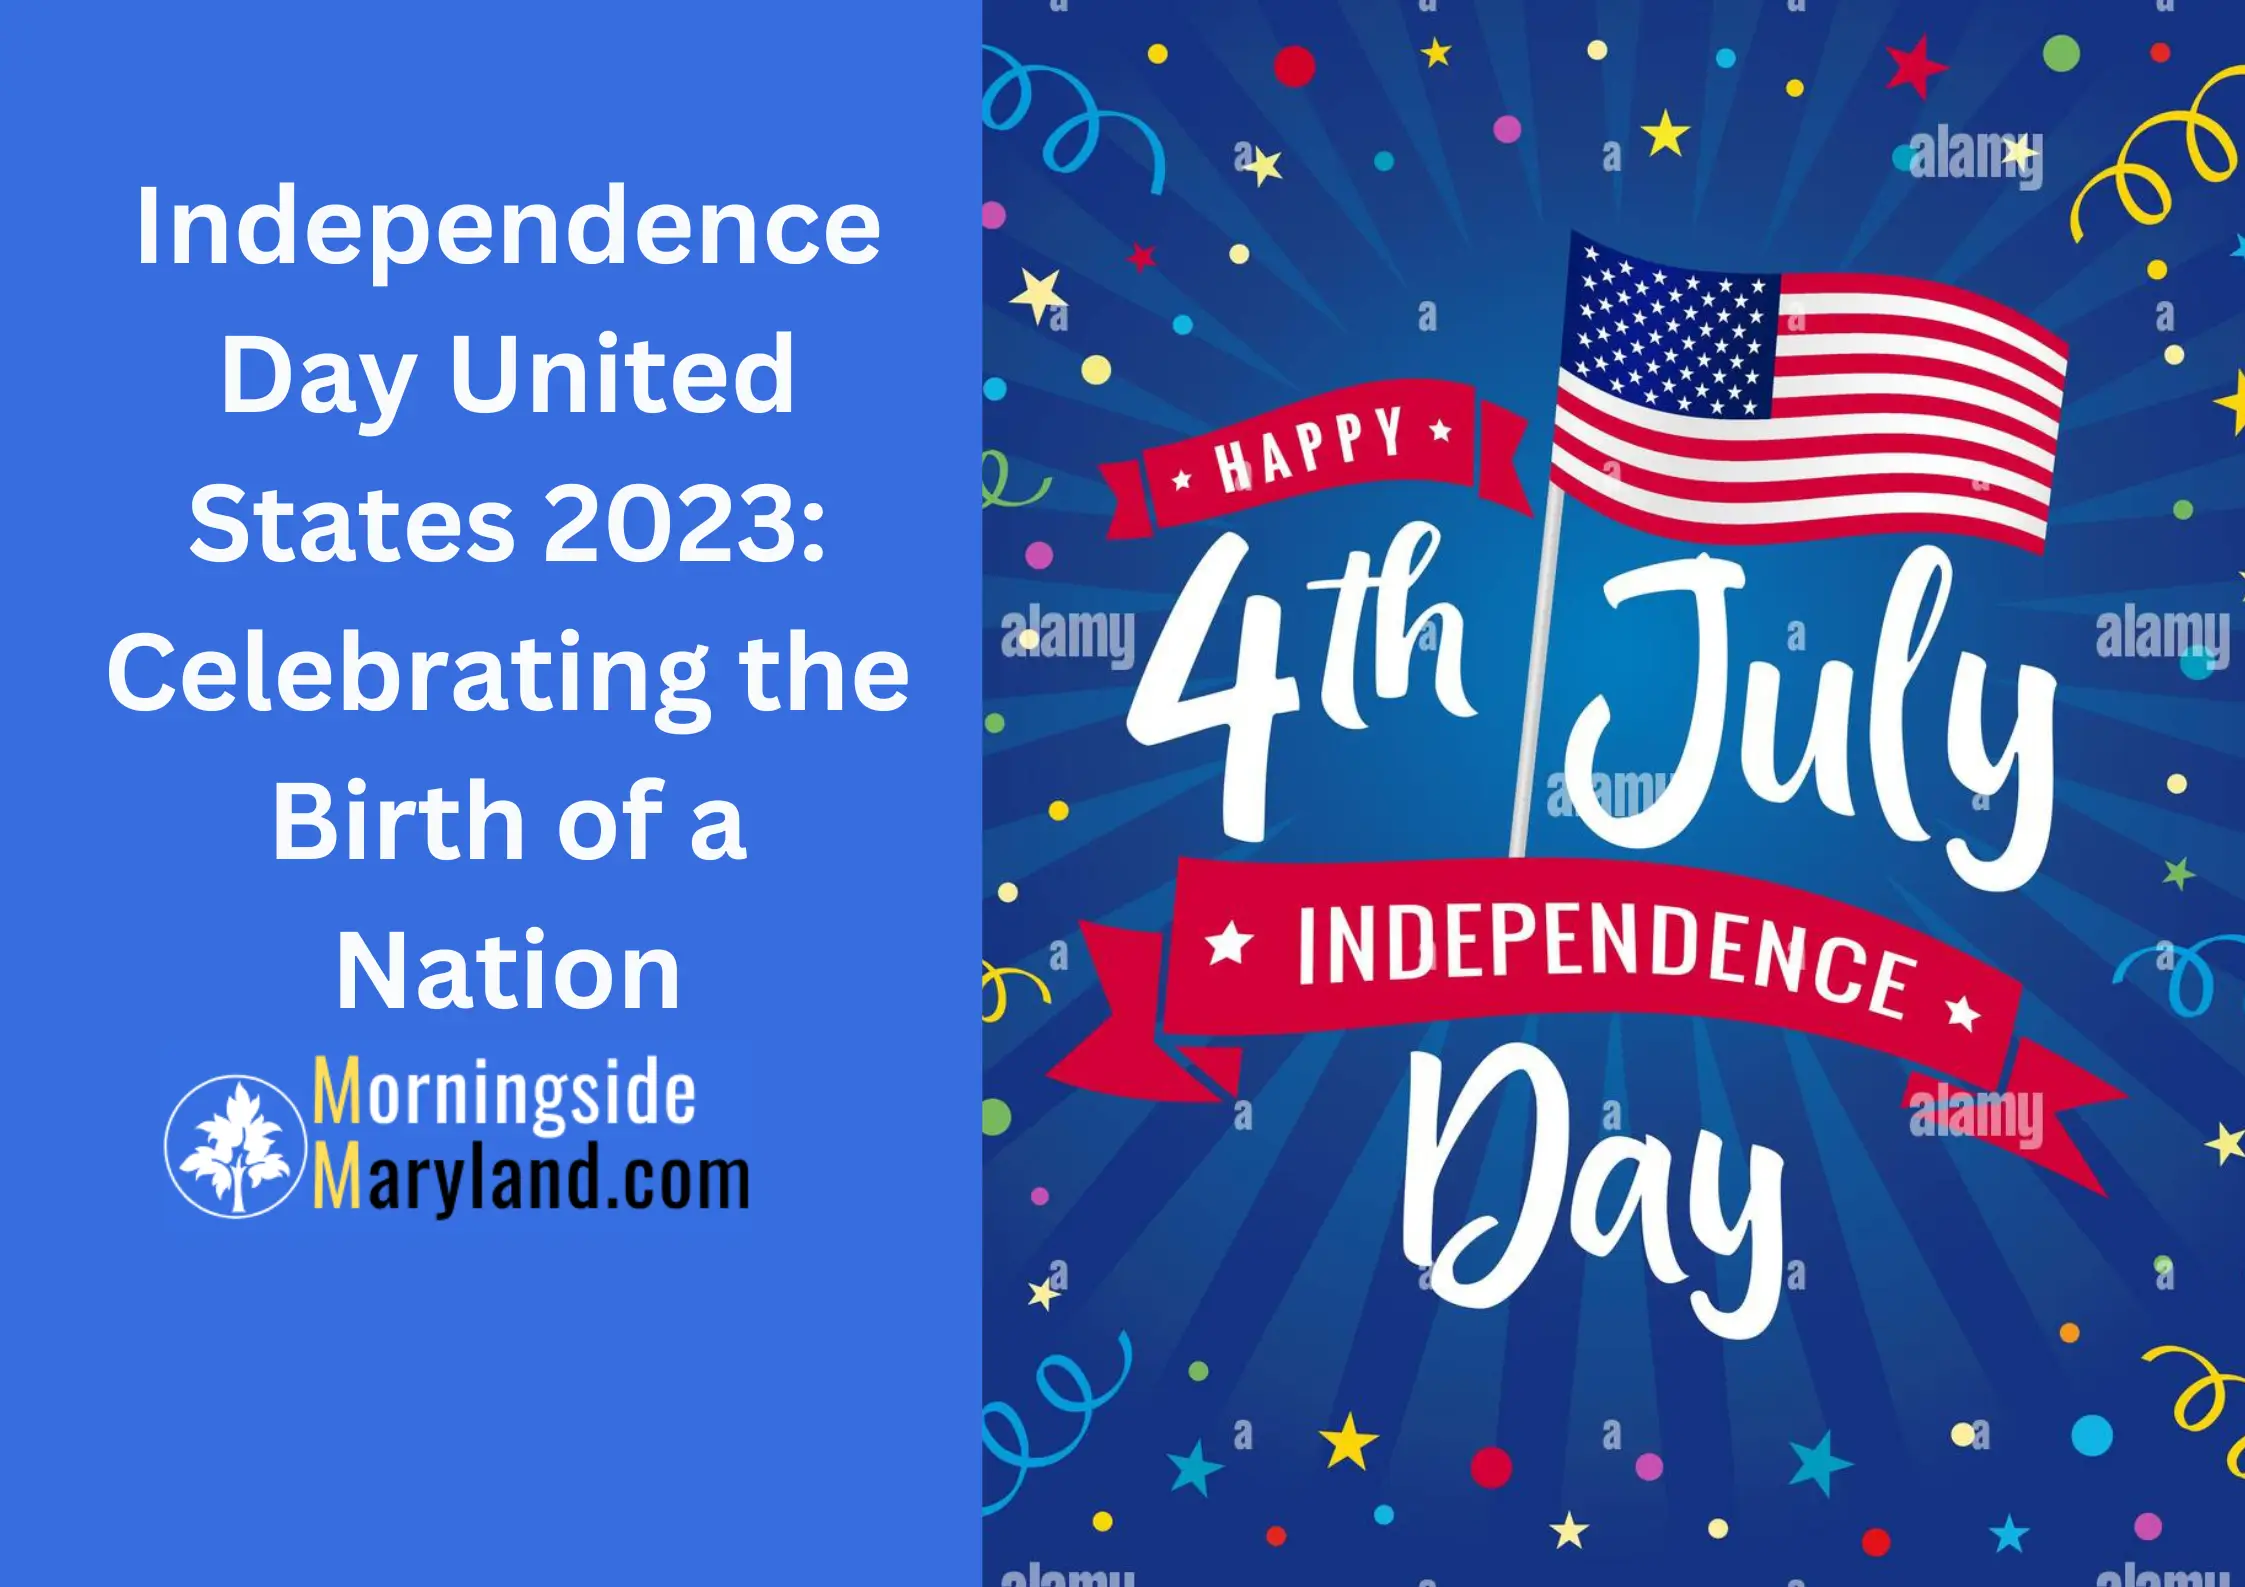 Independence Day United States 2023: Celebrating the Birth of a Nation